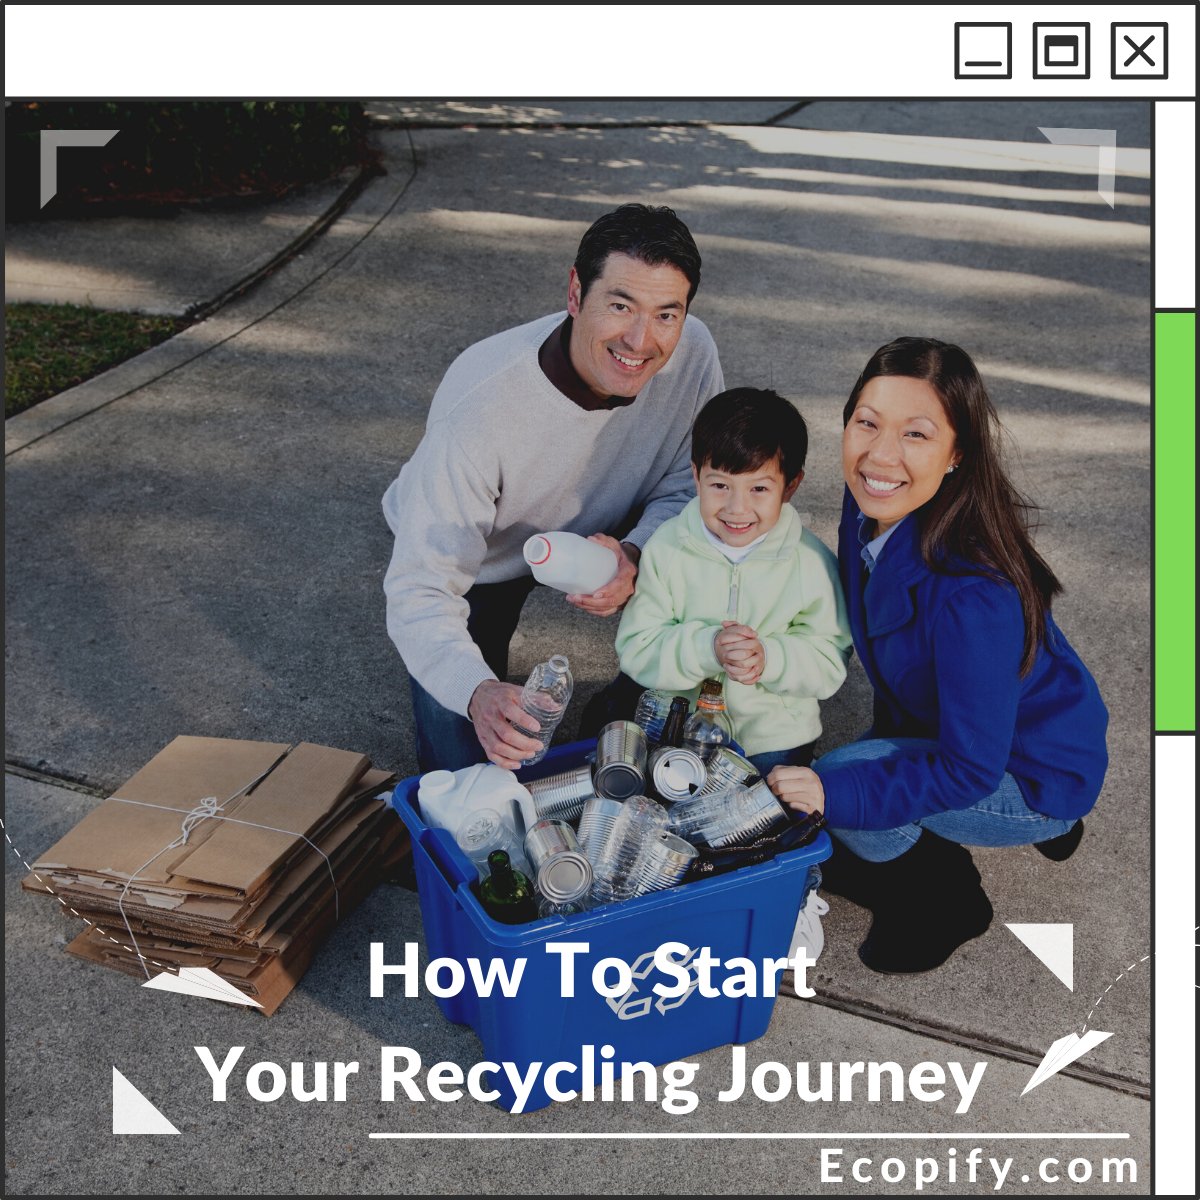 How To Start Your Recycling Journey